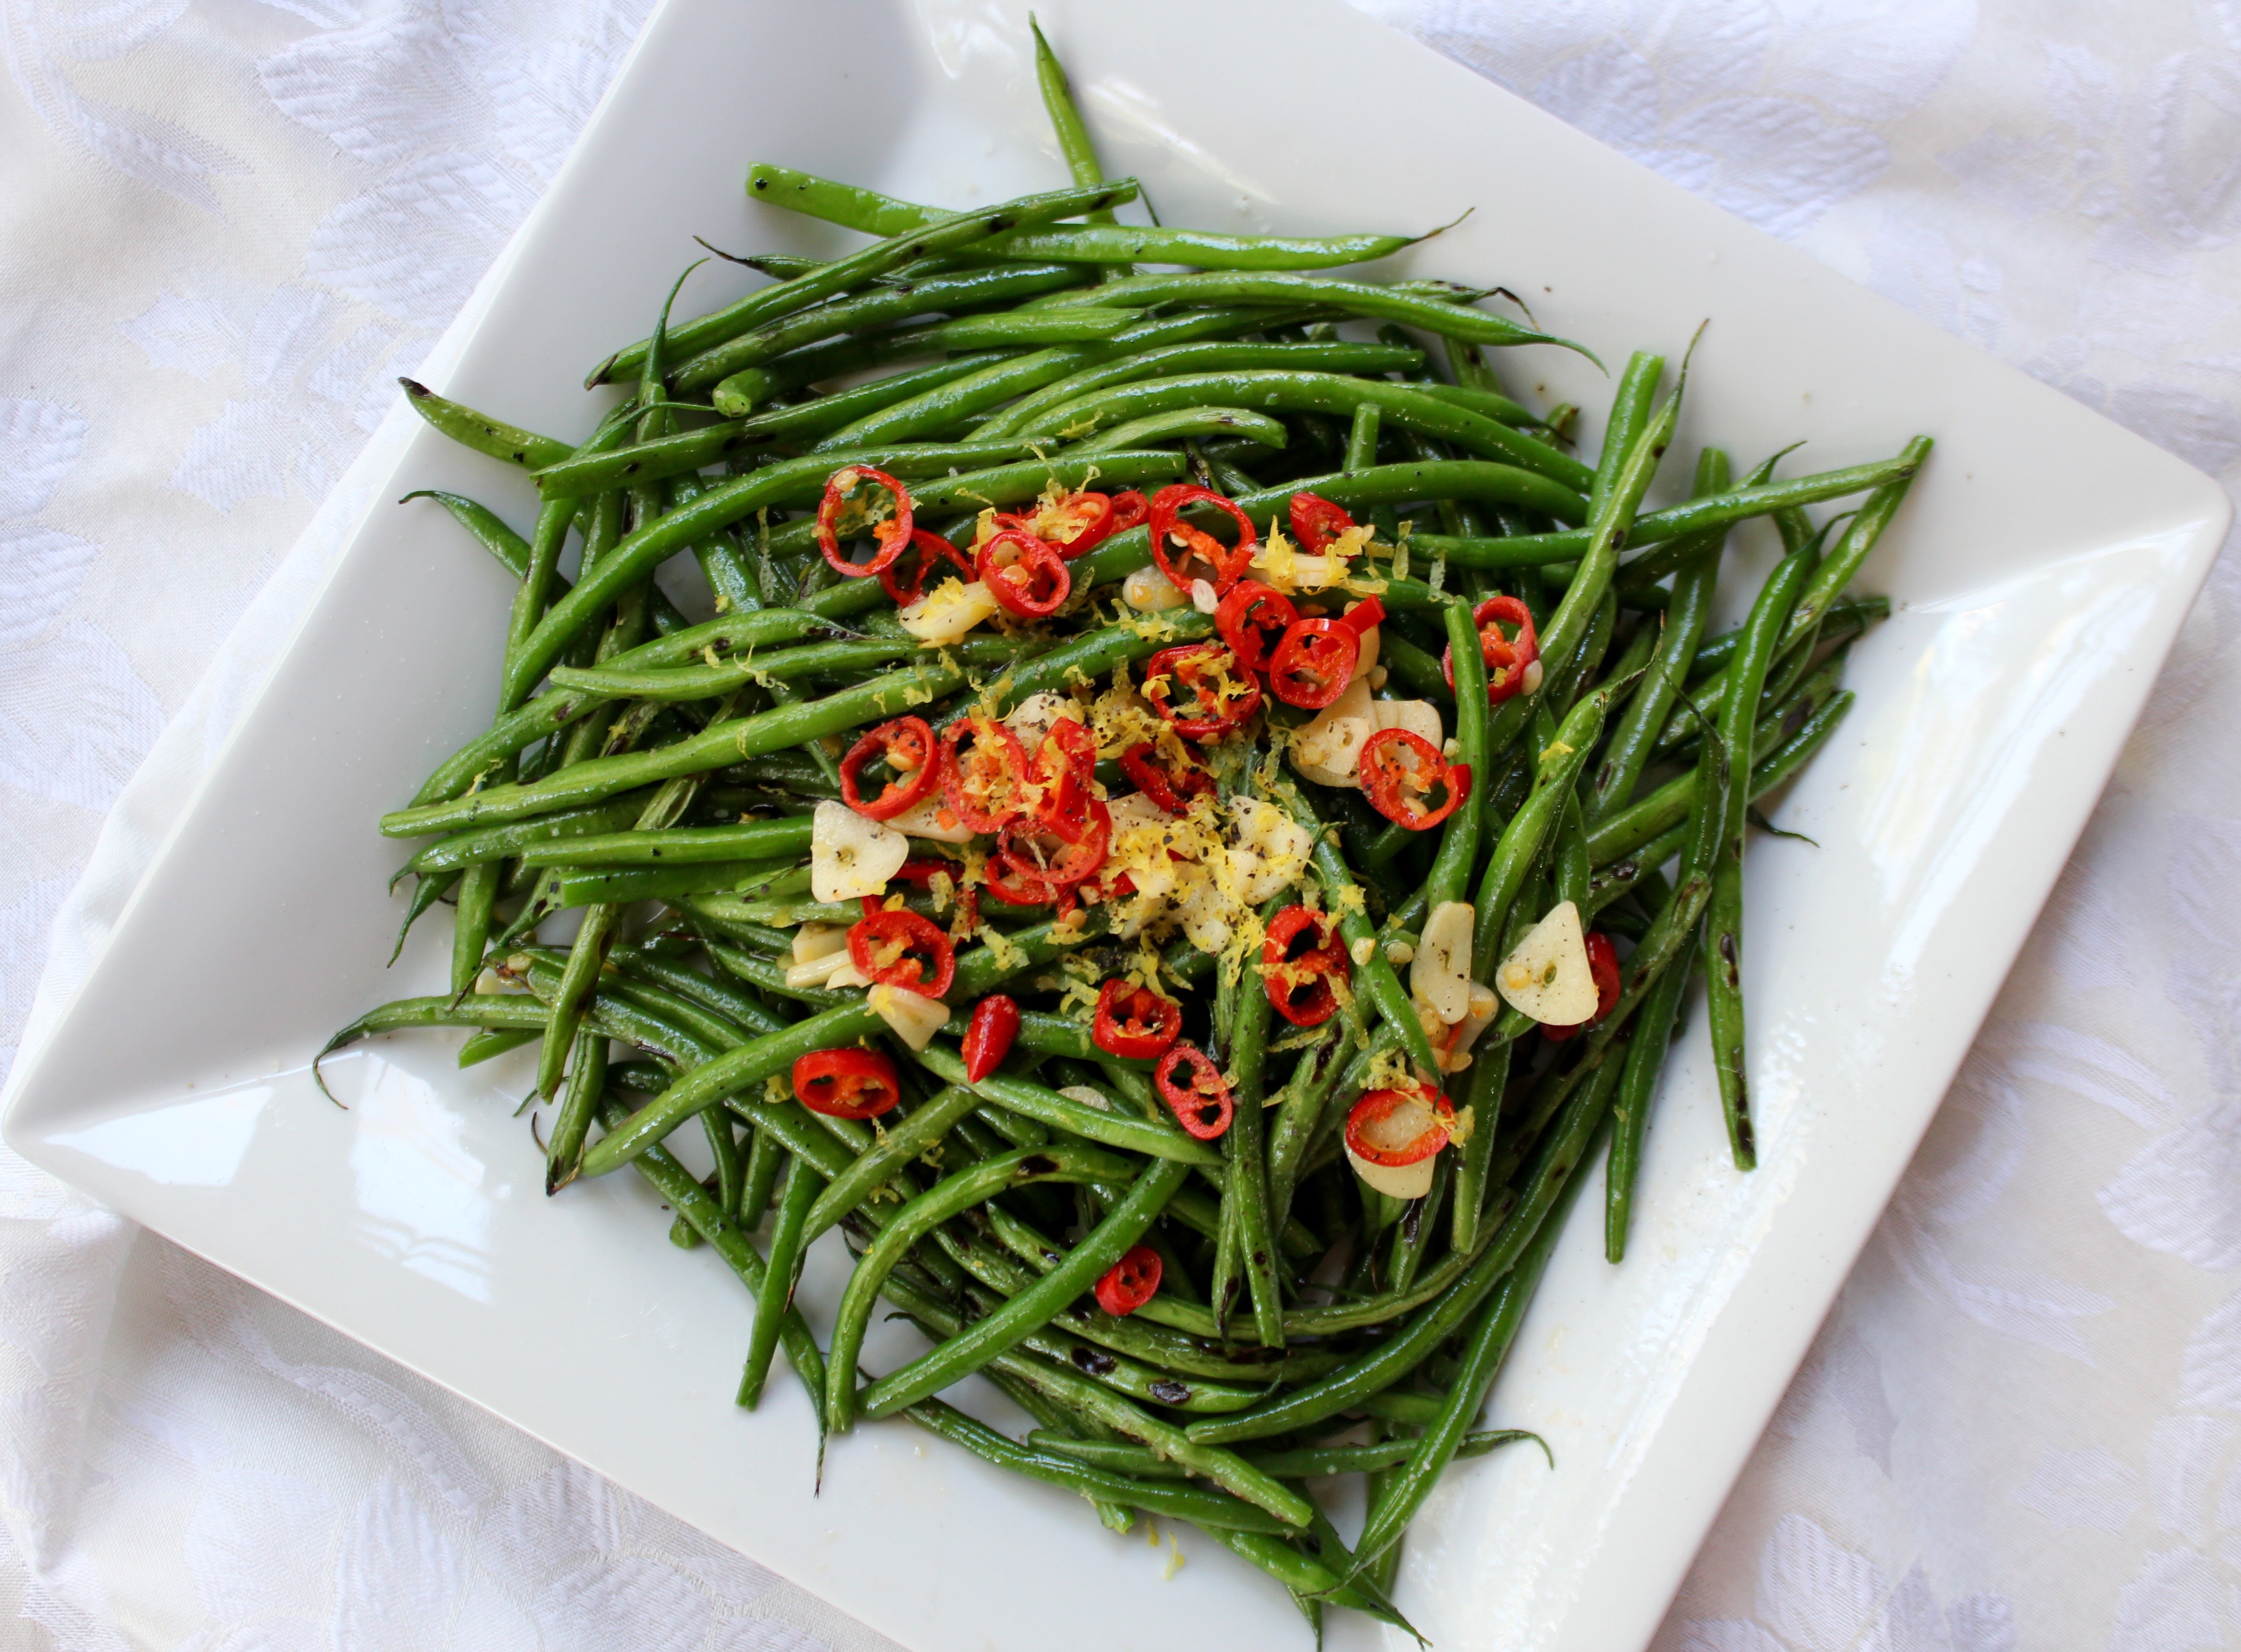 Chargrilled French Beans with Chili & Garlic – The Expat Dietitian